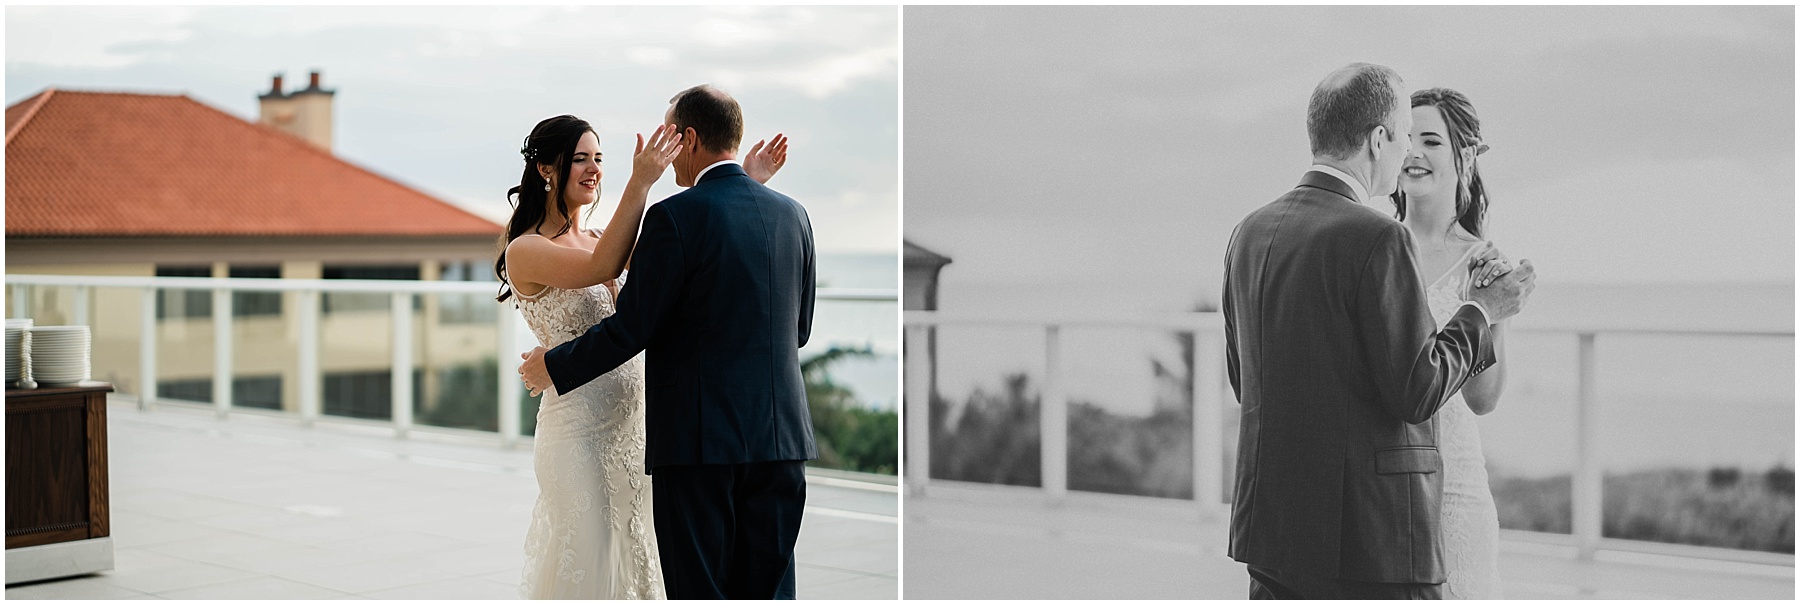 Bride and father dance at JW Marriott Marco Island in Florida.